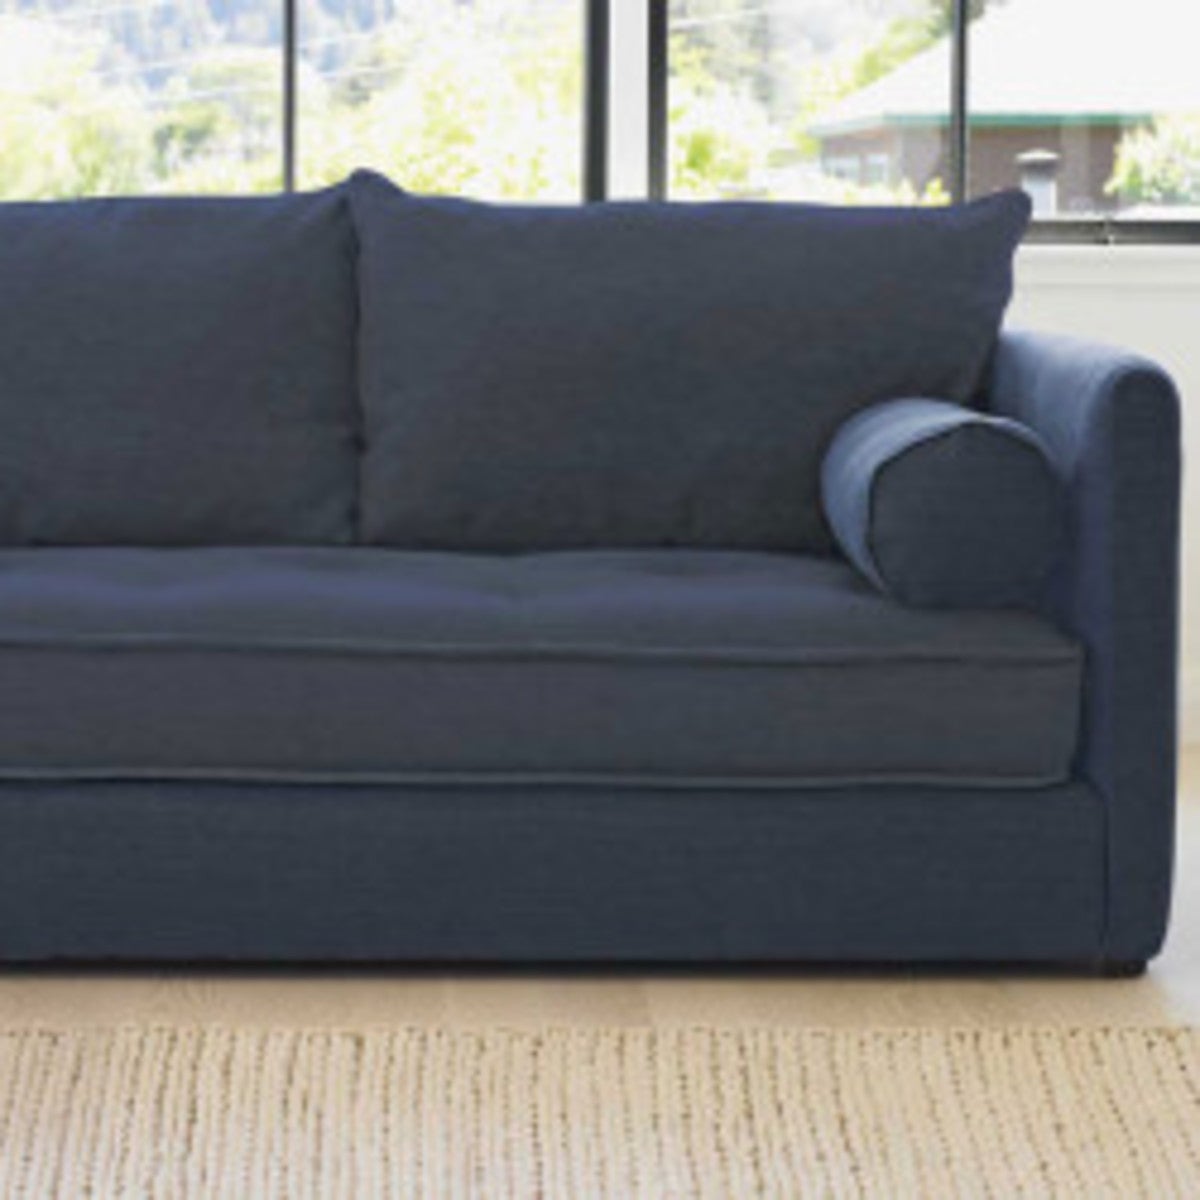 Eco Sectional Sofa Left Side Chaise - Midnight